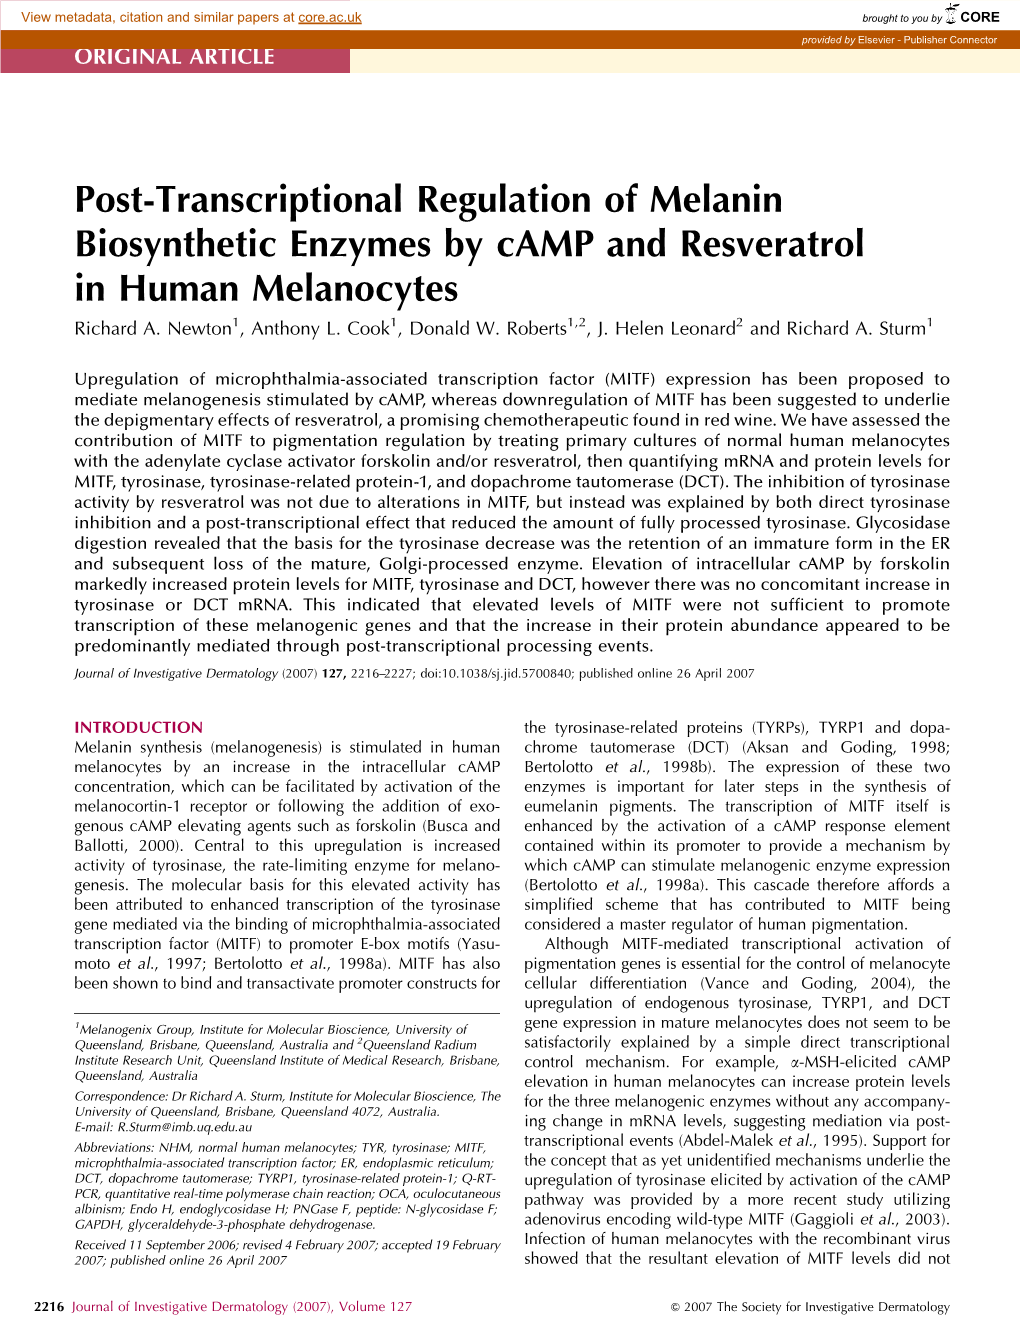 Post-Transcriptional Regulation of Melanin Biosynthetic Enzymes by Camp and Resveratrol in Human Melanocytes Richard A